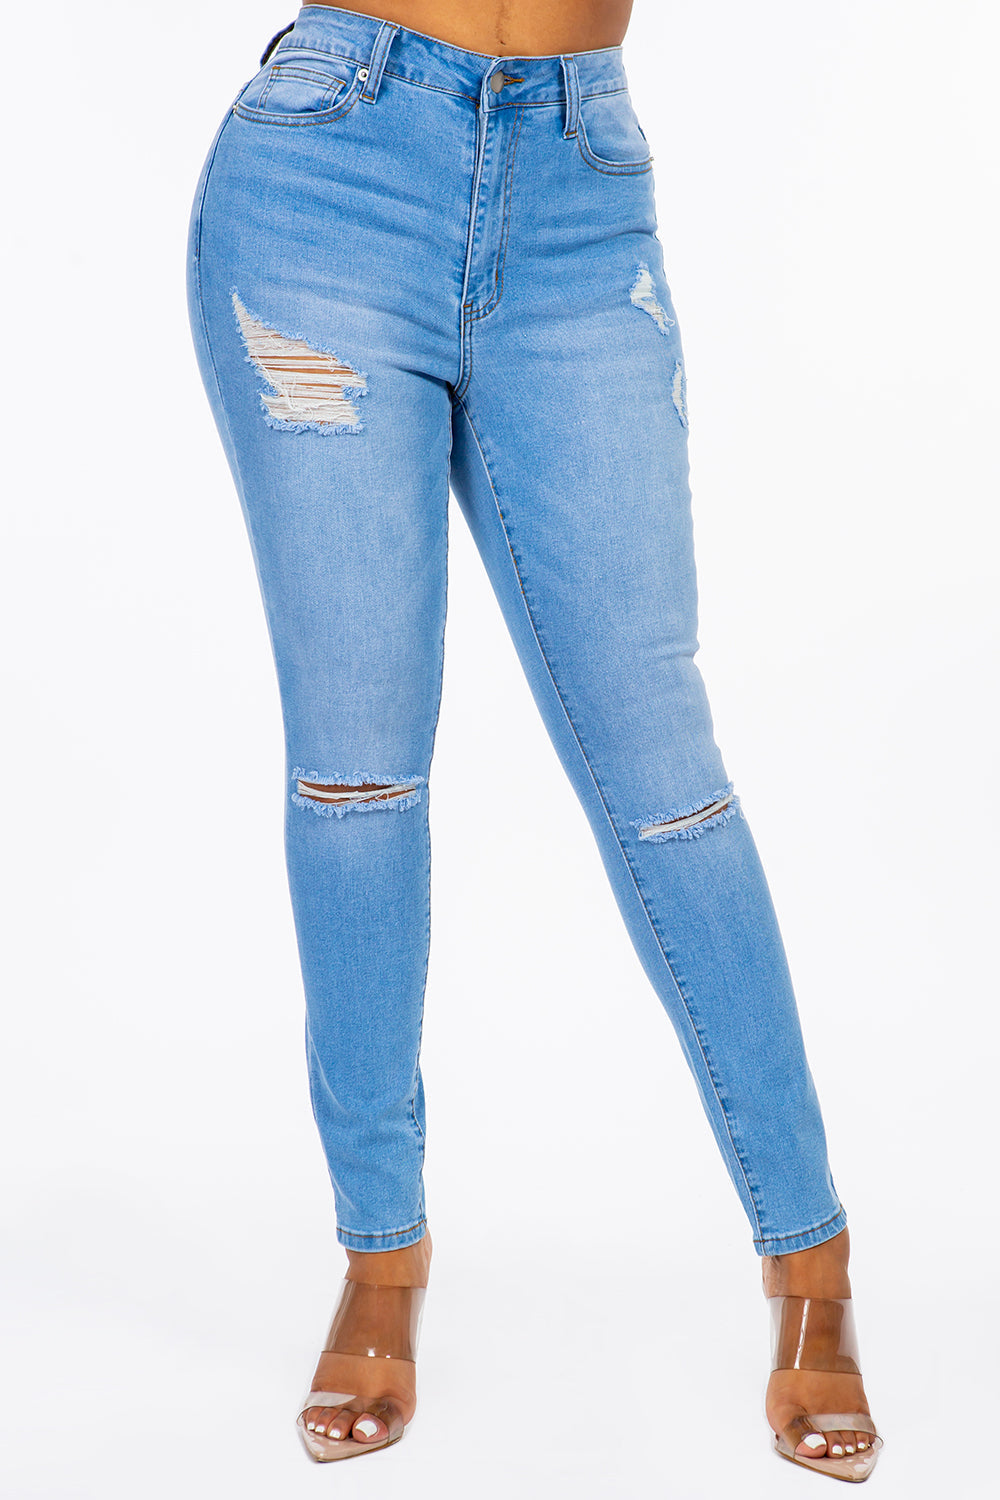 Extreme Stretch Distressed High Rise Skinny Jeans Medium YH2212